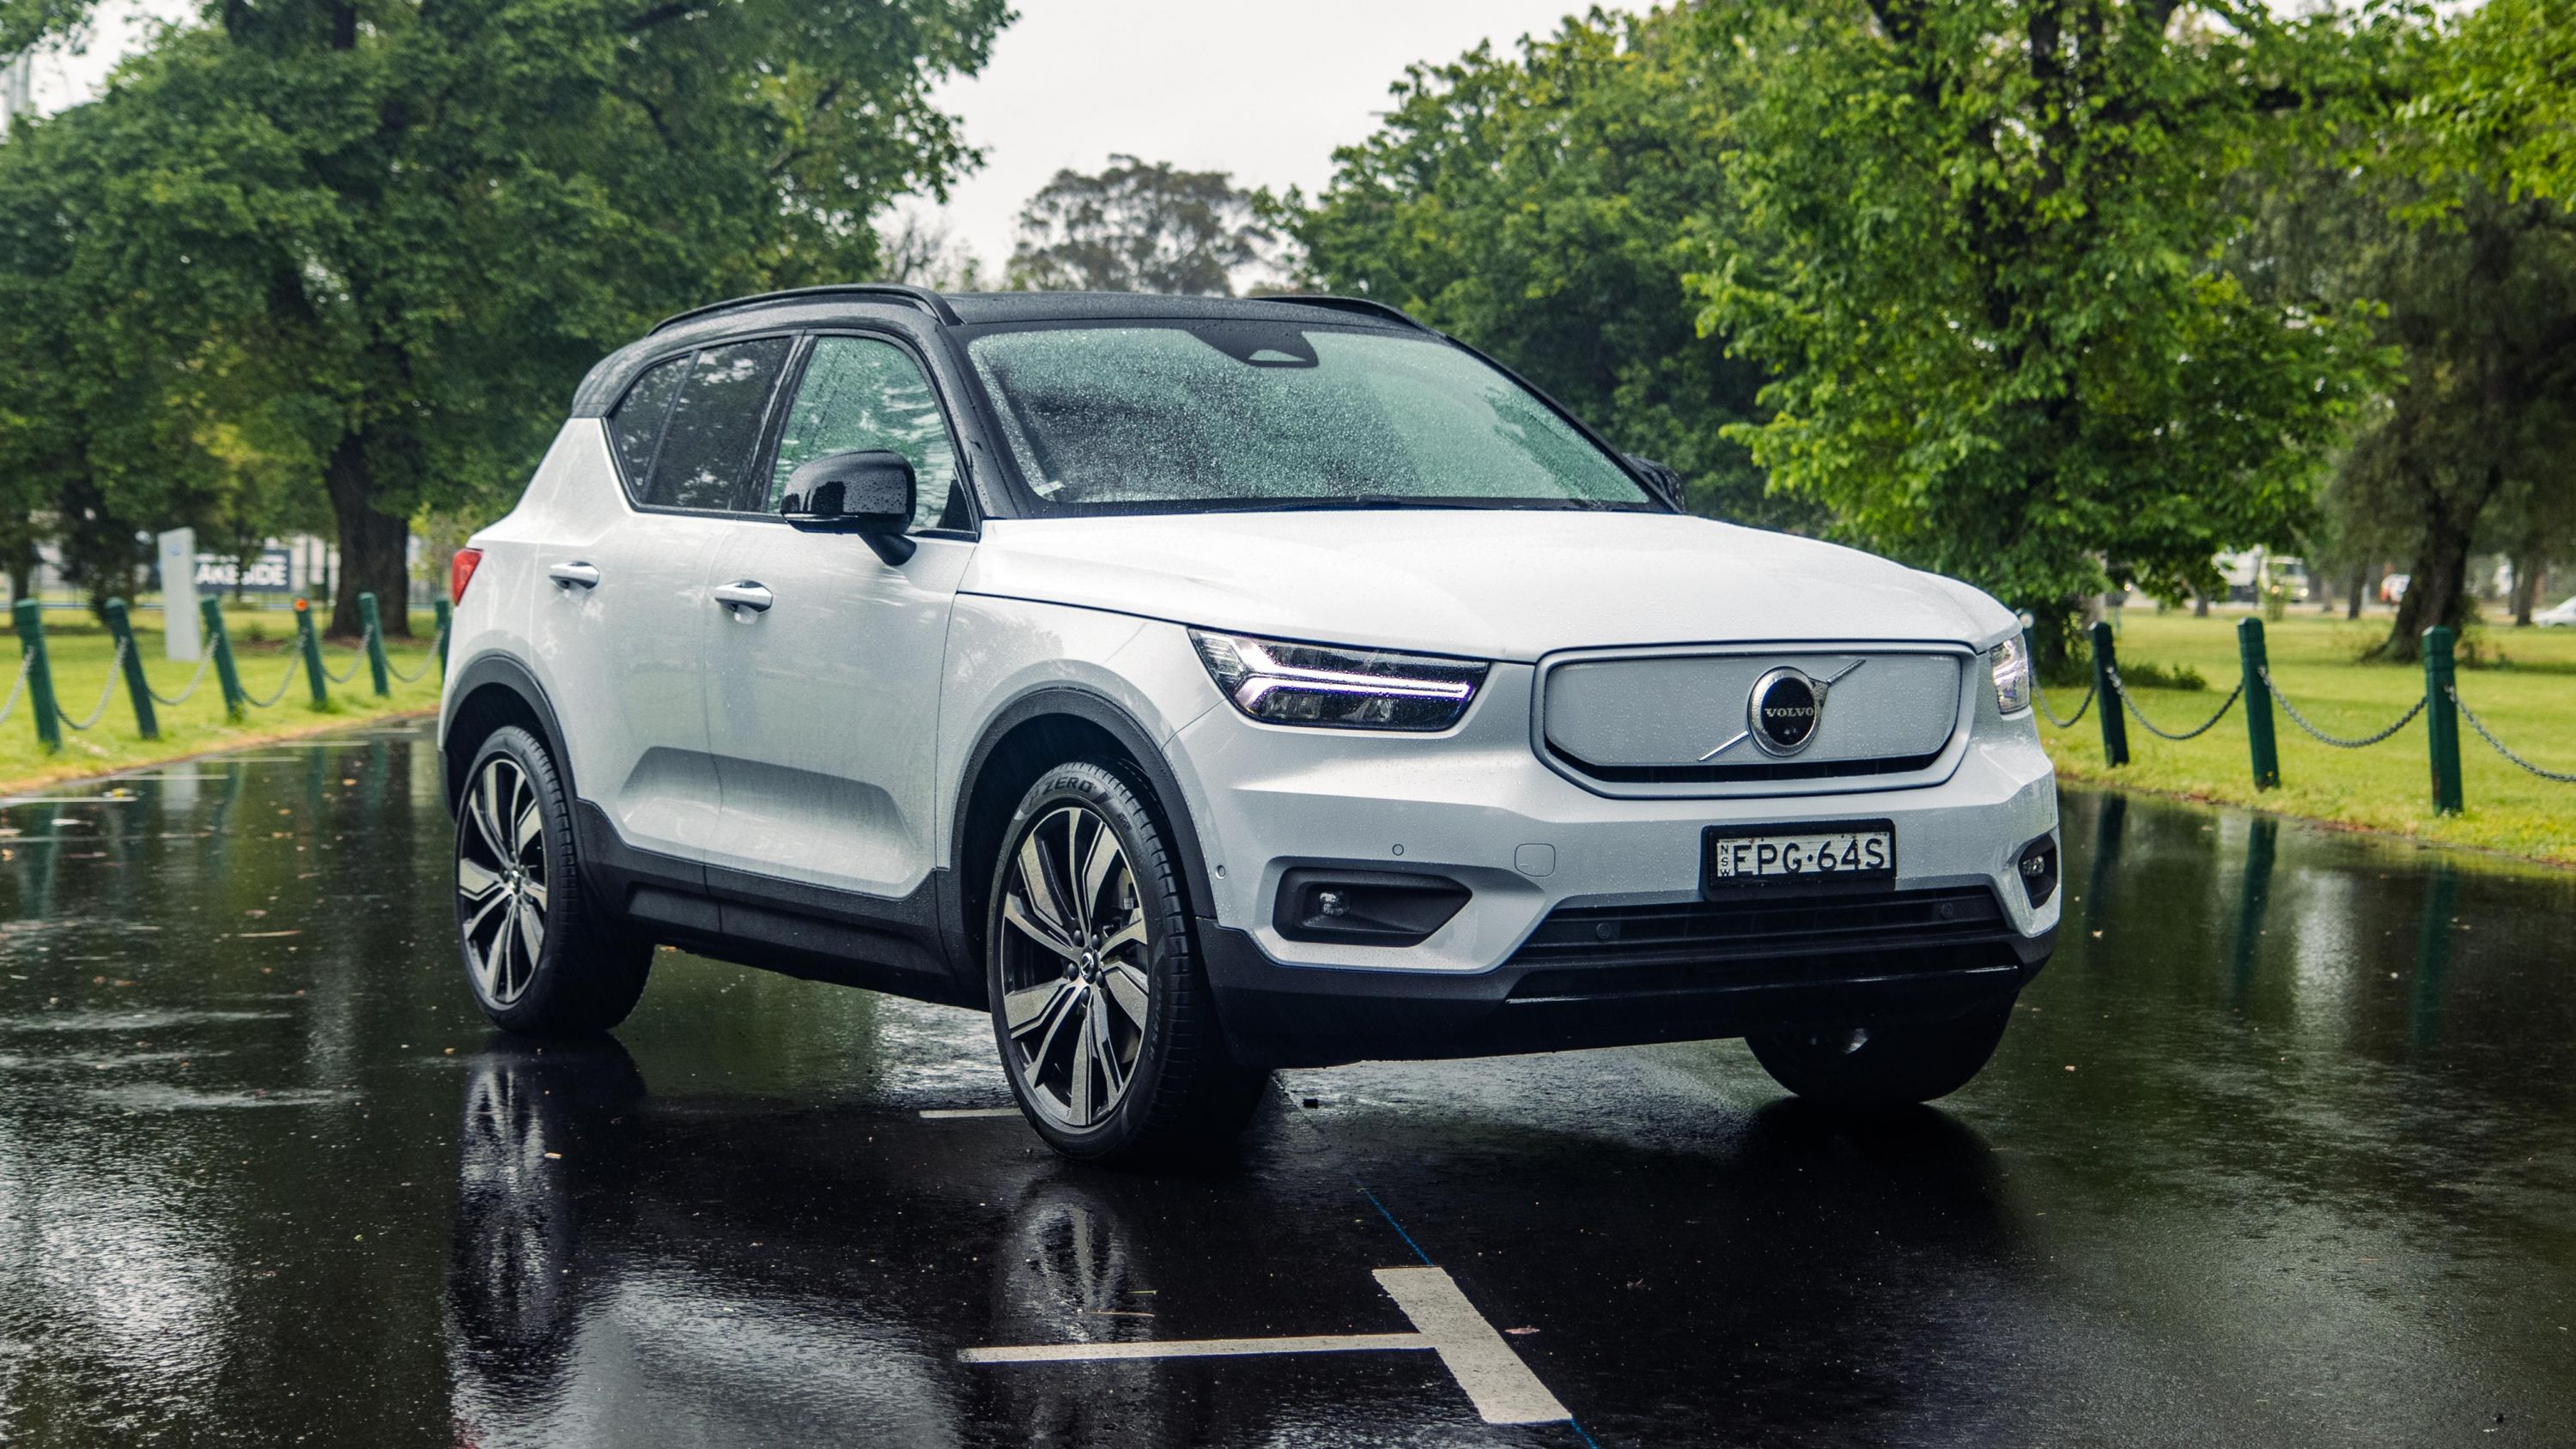 XC40 Recharge pure electric - Overview